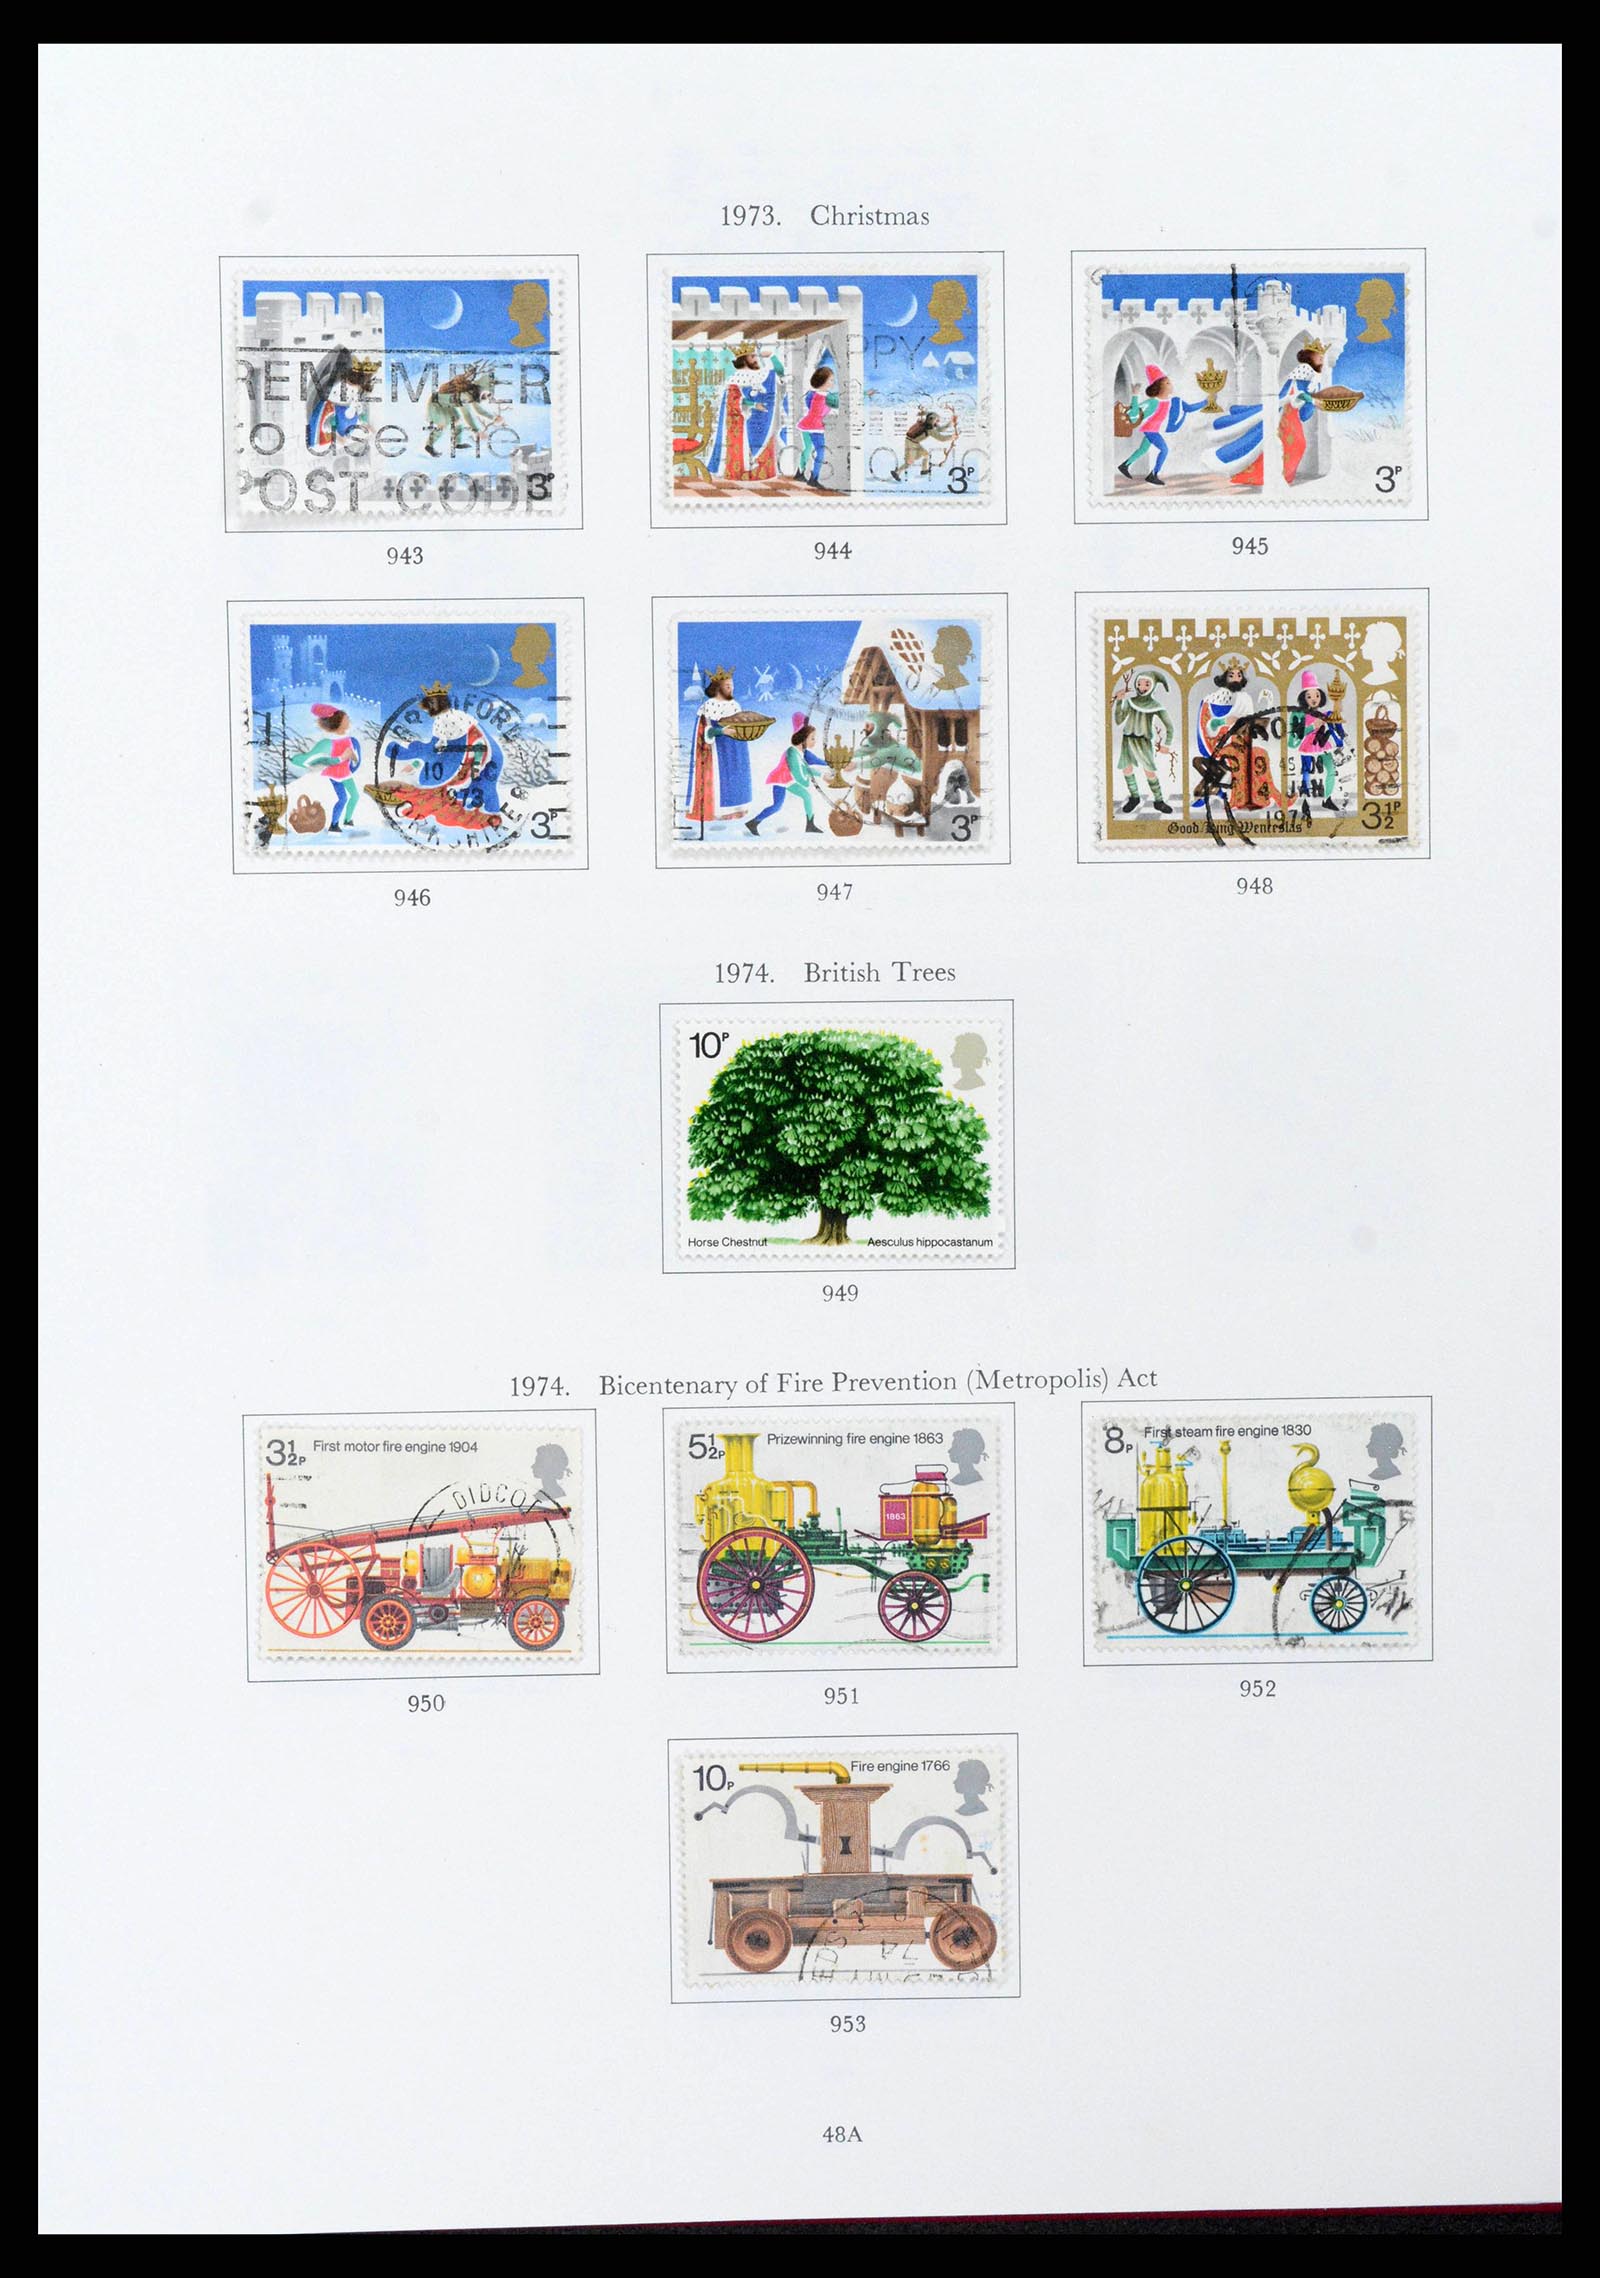 38275 0050 - Stamp collection 38275 Great Britain 1840-1983.